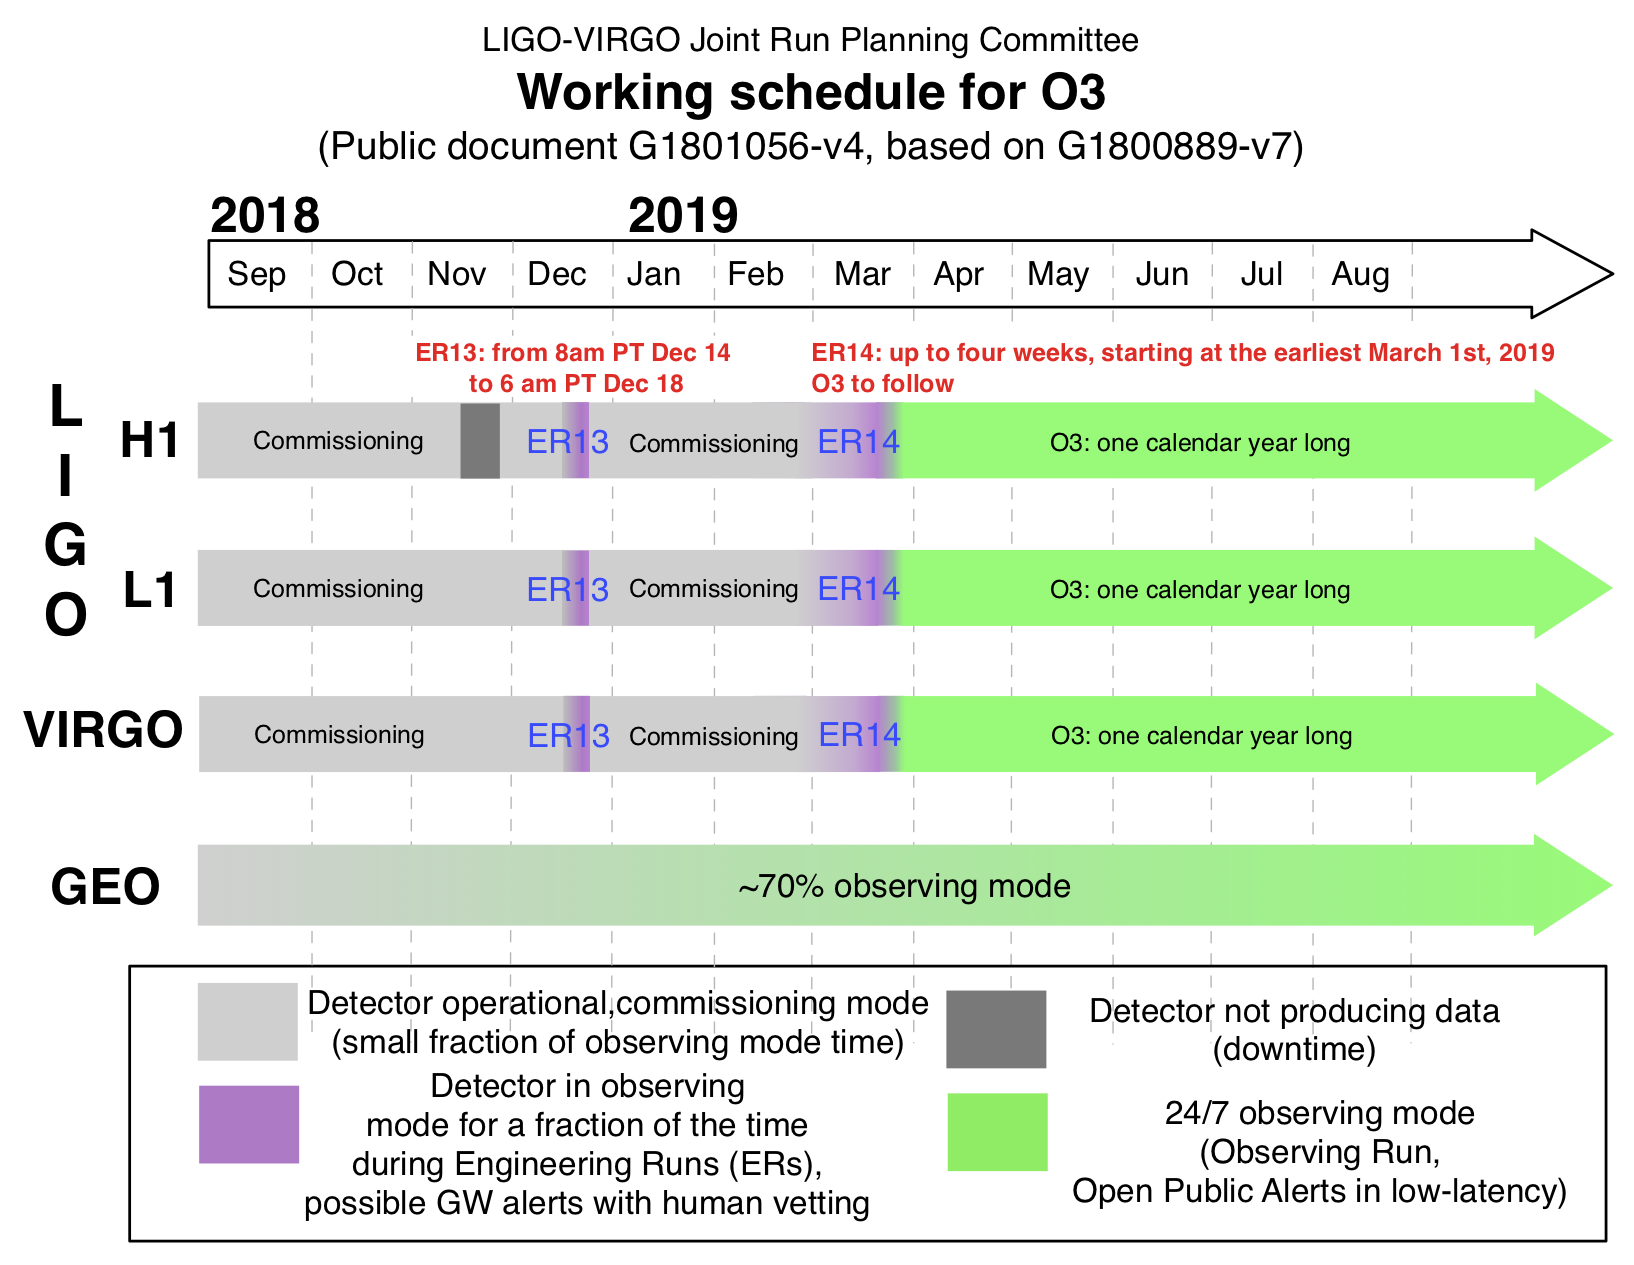 Current observing schedule